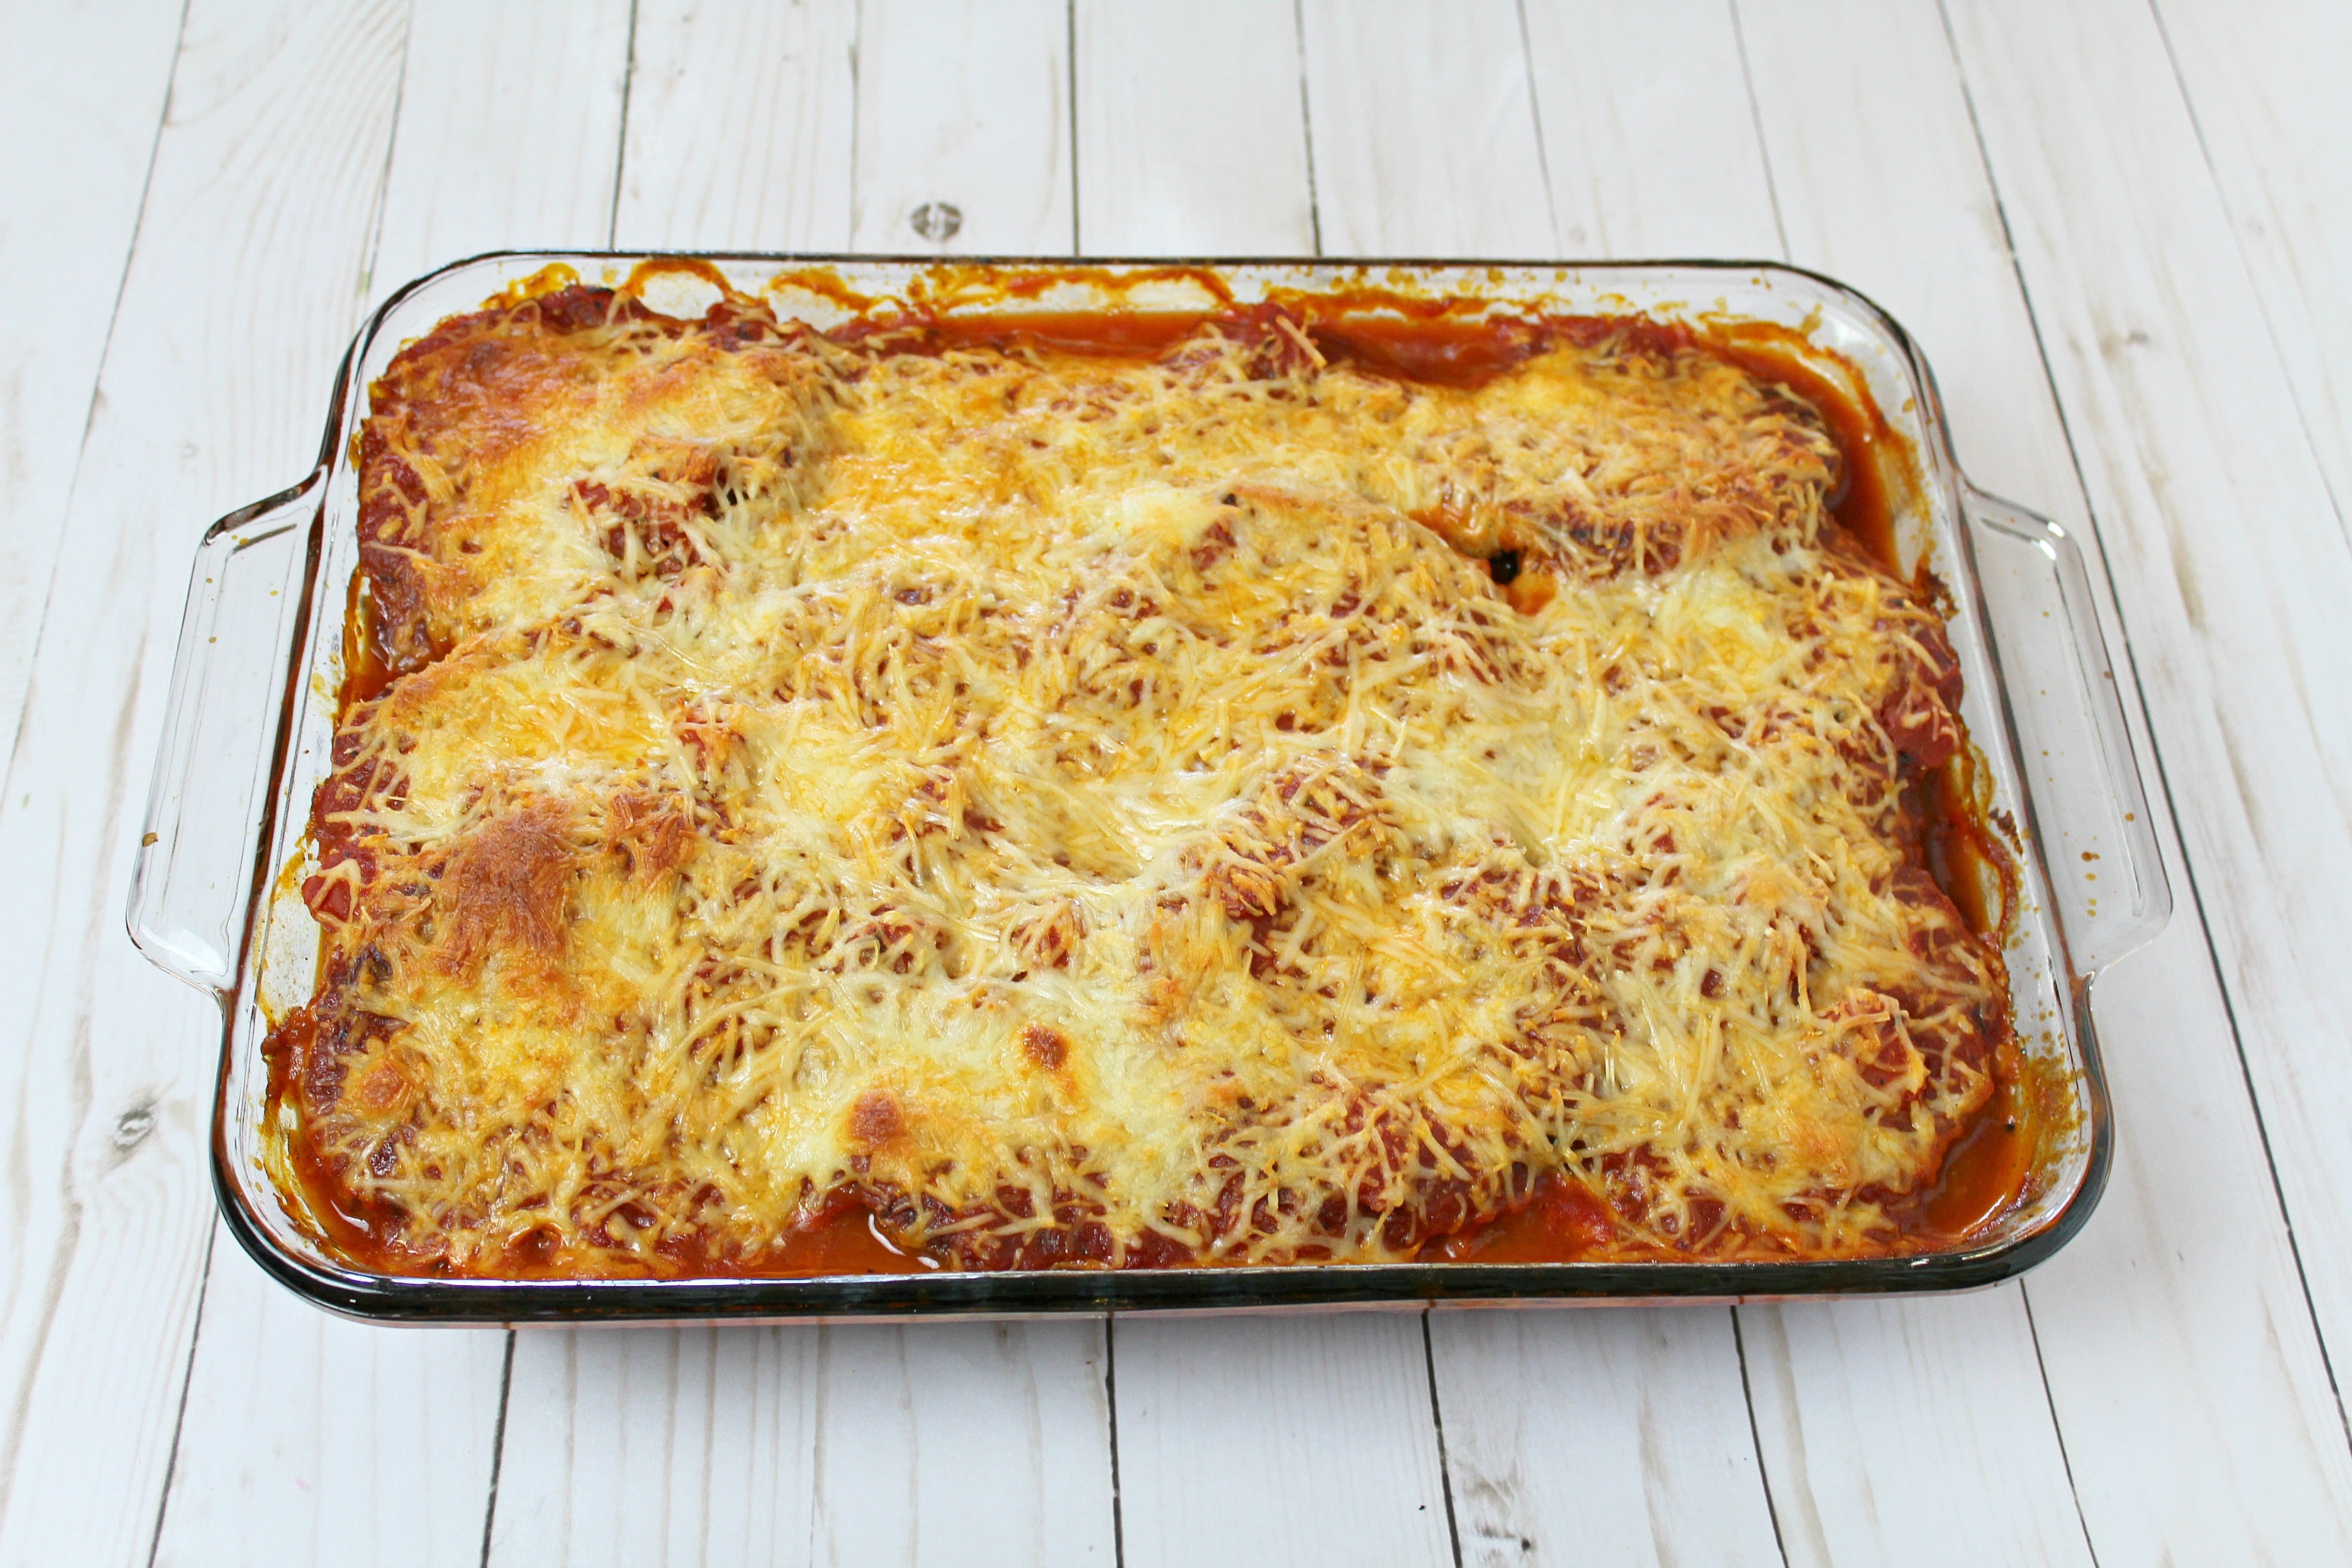 Bake eggplant Parmesan until mixture is bubbly and cheese is golden brown.